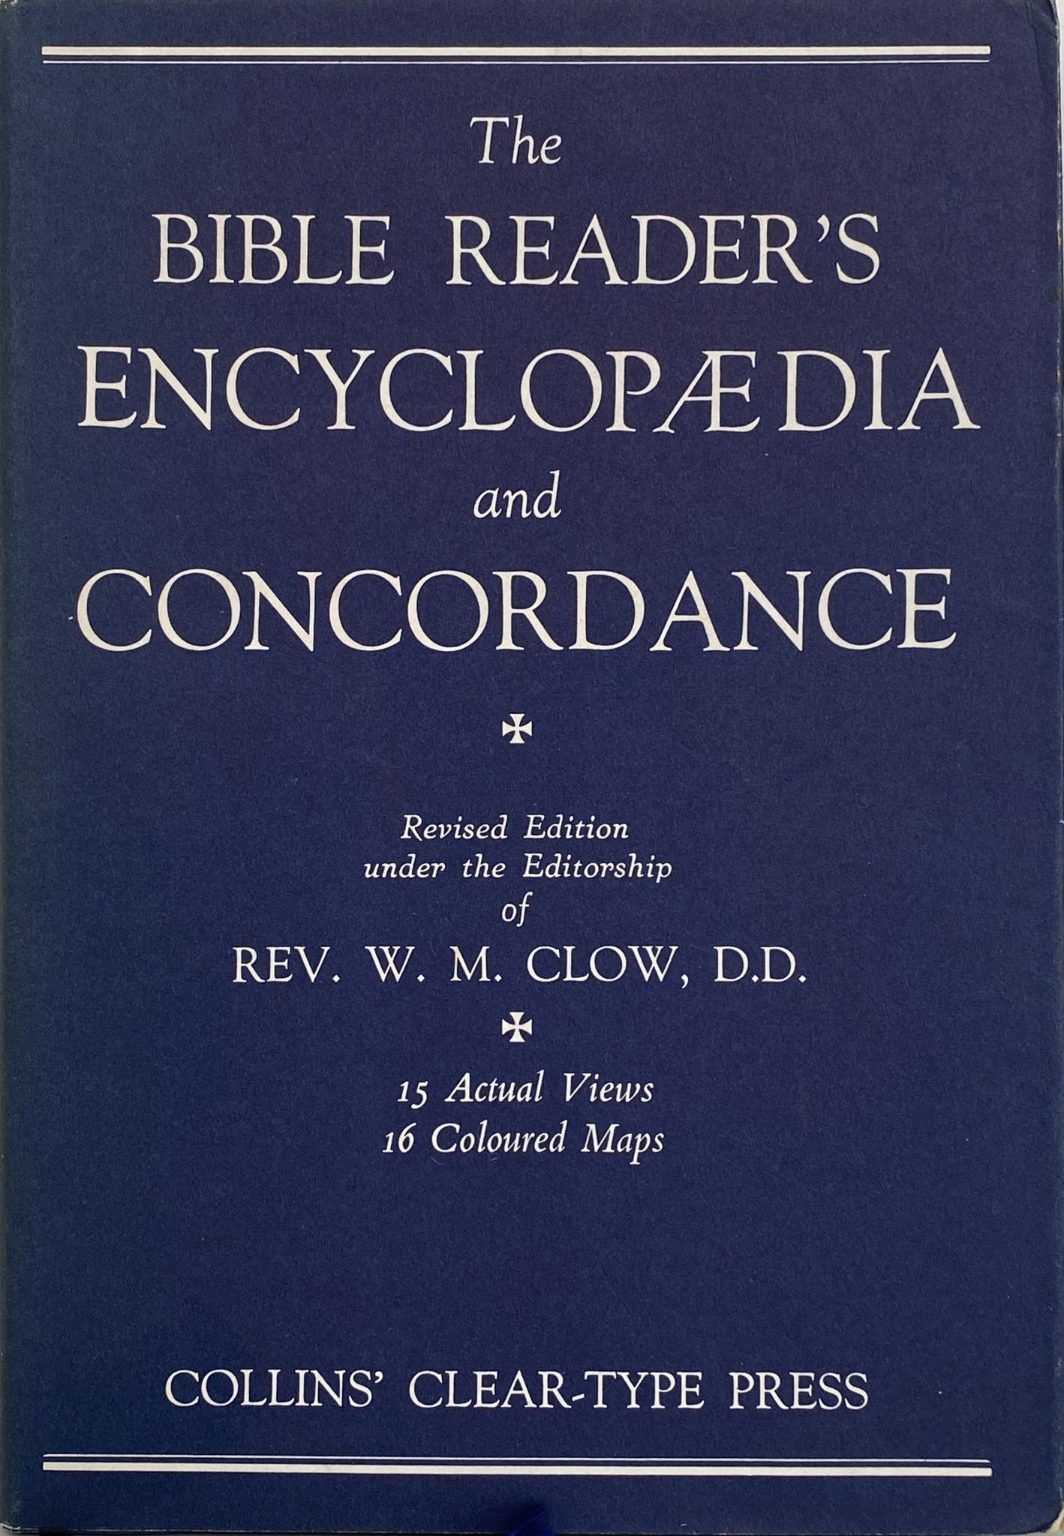 THE BIBLE READER'S ENCYCLOPAEDIA and CONCORDANCE: Revised Edition